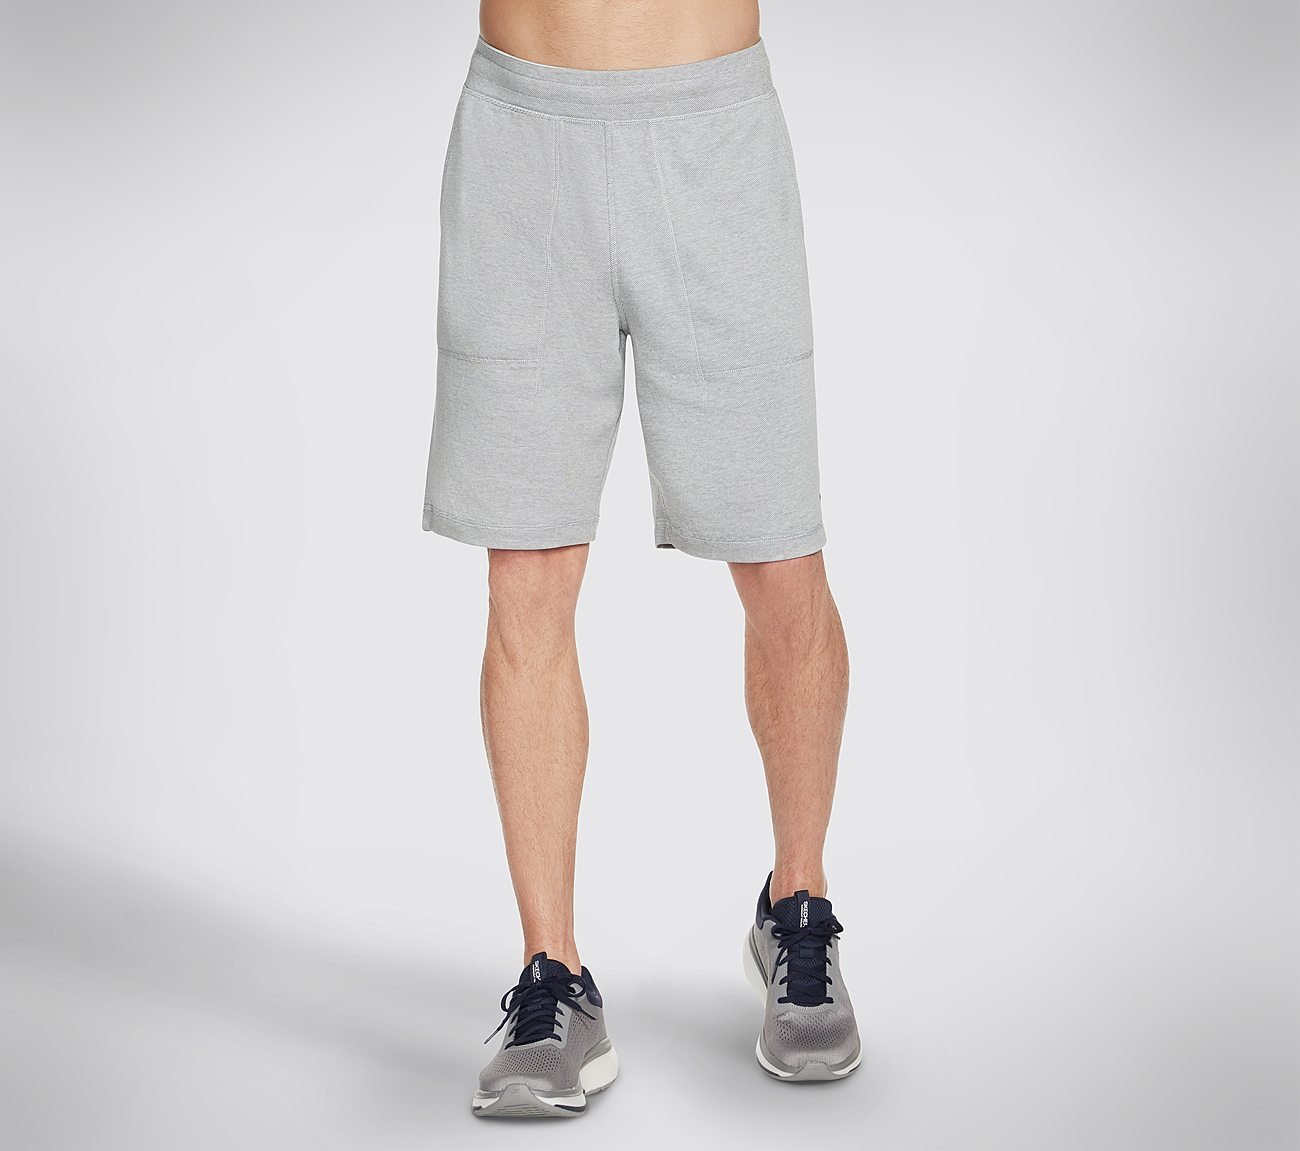 GOKNIT PIQUE 9IN SHORT, LIGHT GREY Apparels Lateral View